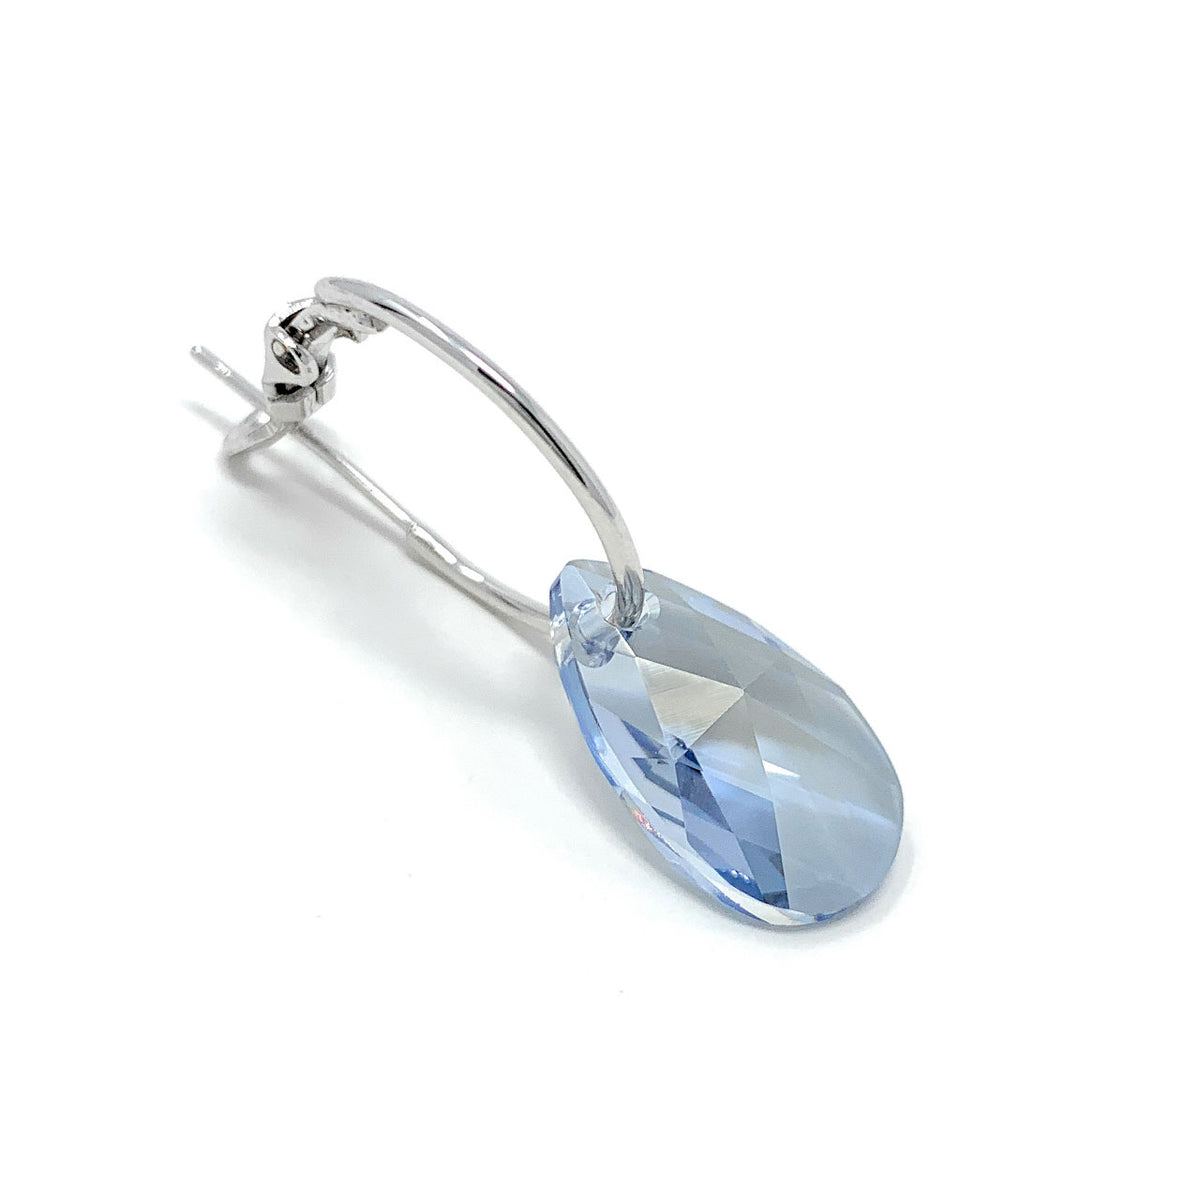 Aurora Small Drop Earrings with Grey Blue Shade Pear Crystals from Swarovski Silver Toned Rhodium Plated - Ed Heart